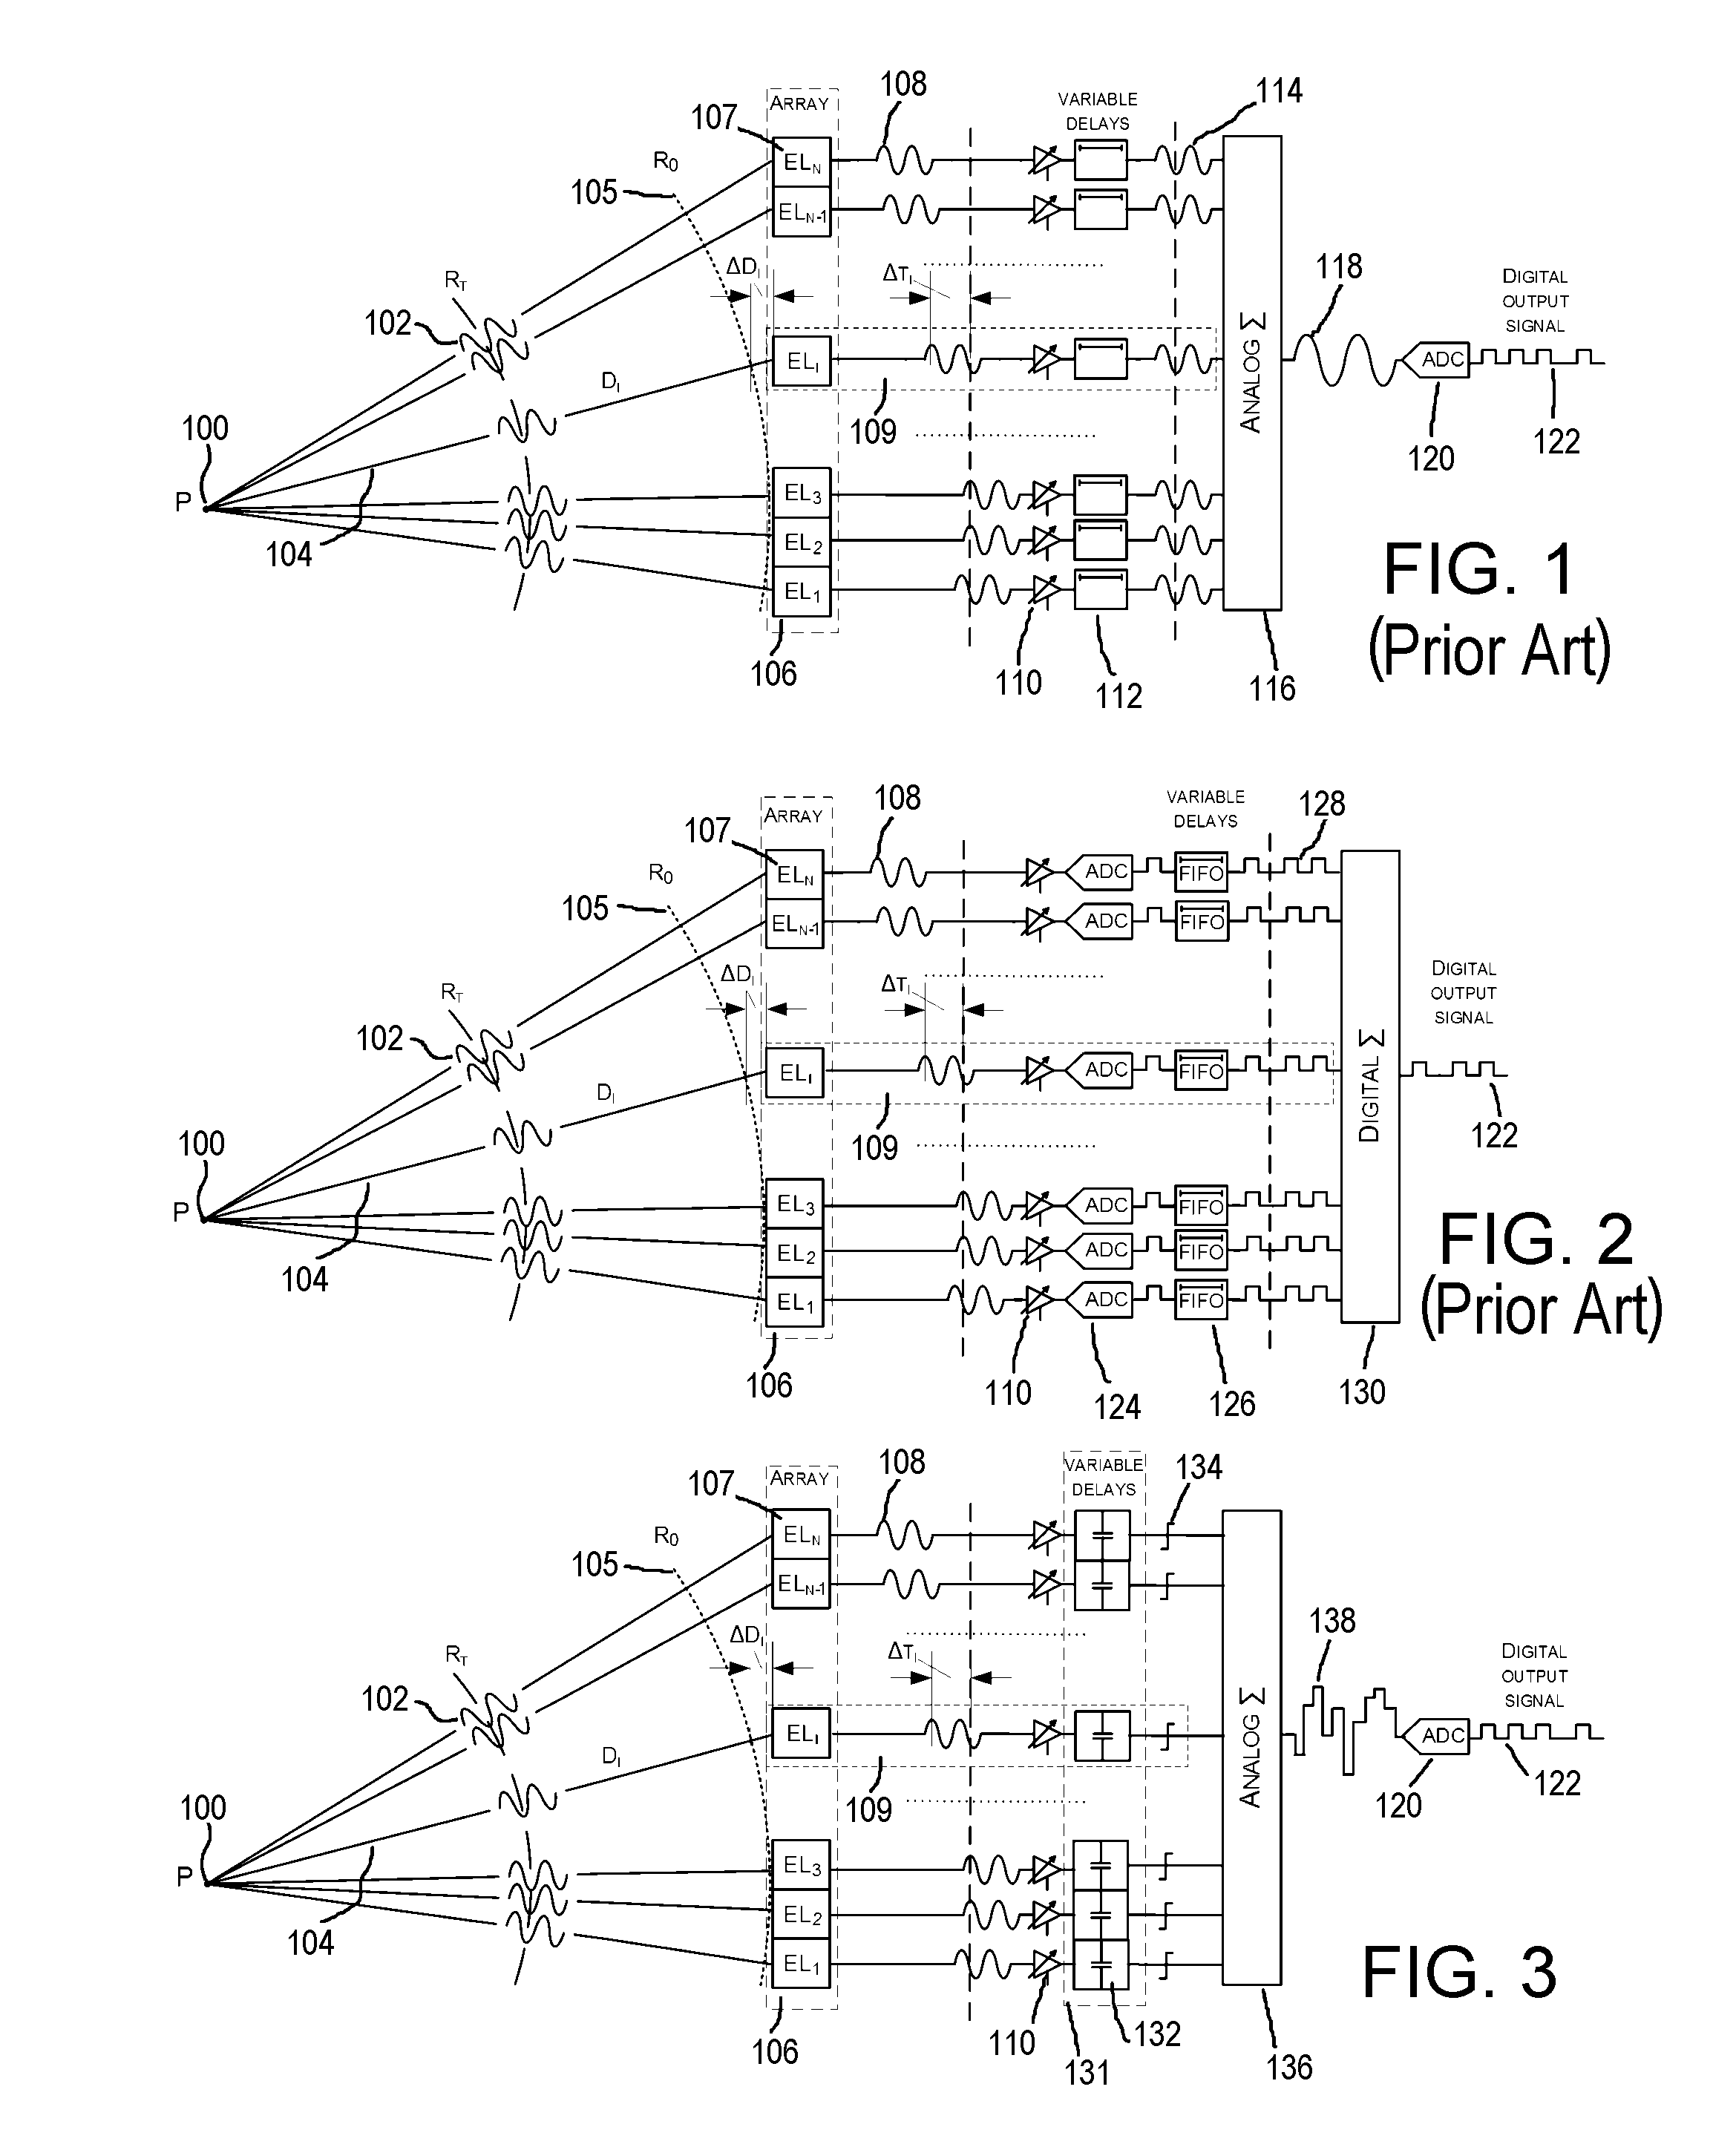 Analog store digital read ultrasound beamforming system and method